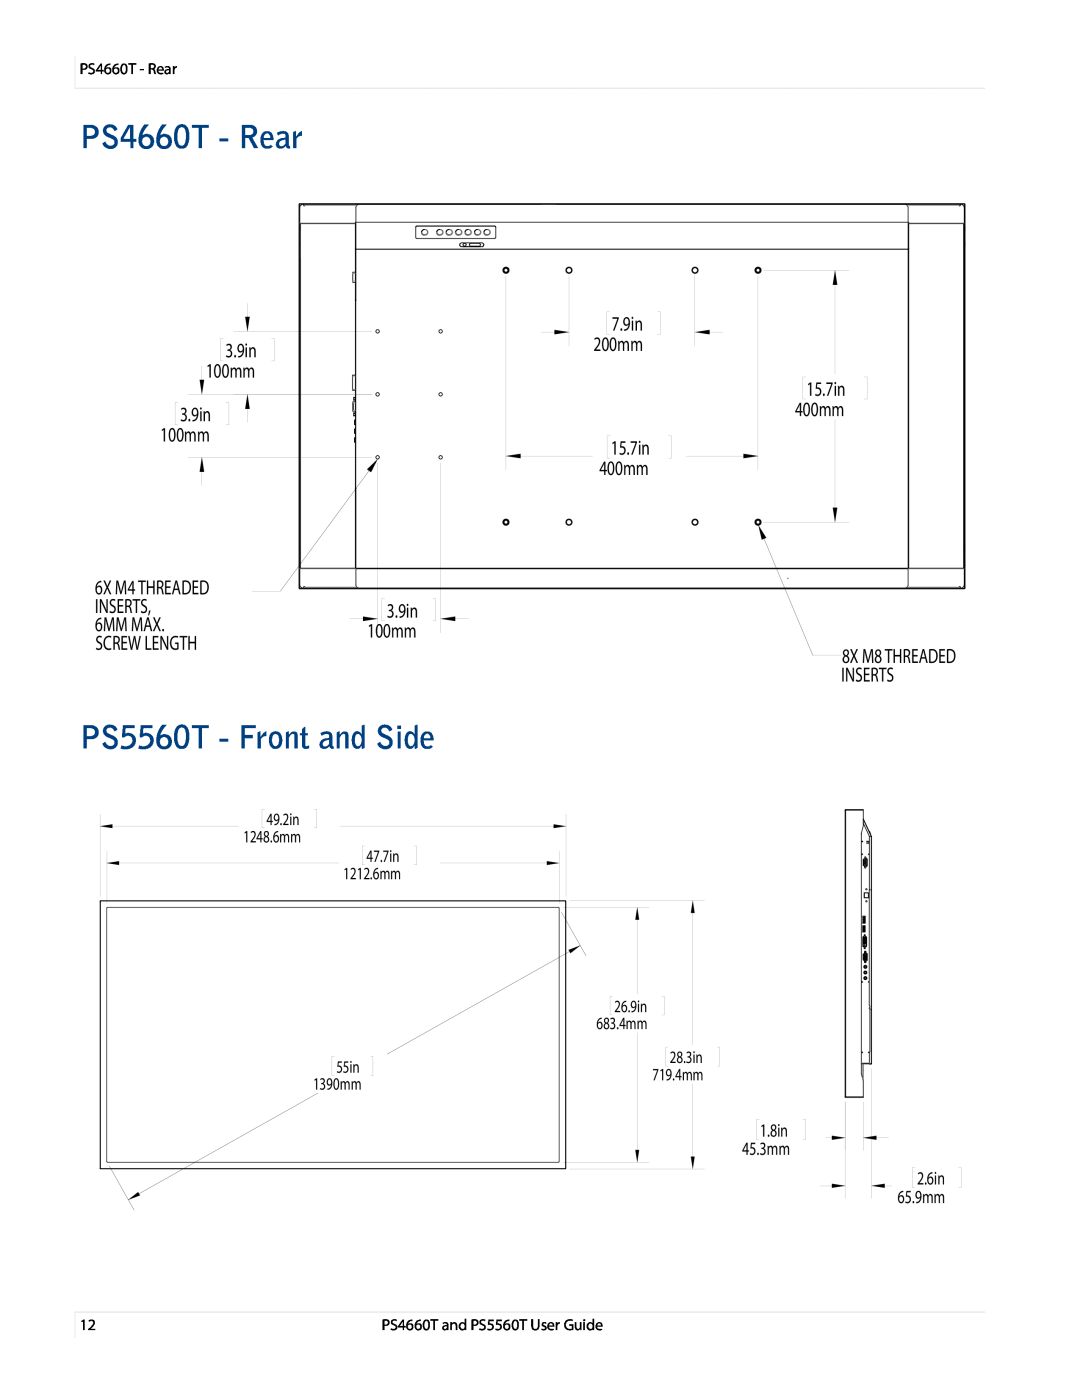 Planar PS4660T and PS5560T, PS466OT user manual PS4660T - Rear, PS5560T - Front and Side, 1.8in 45.3mm, 2.6in 65.9mm 